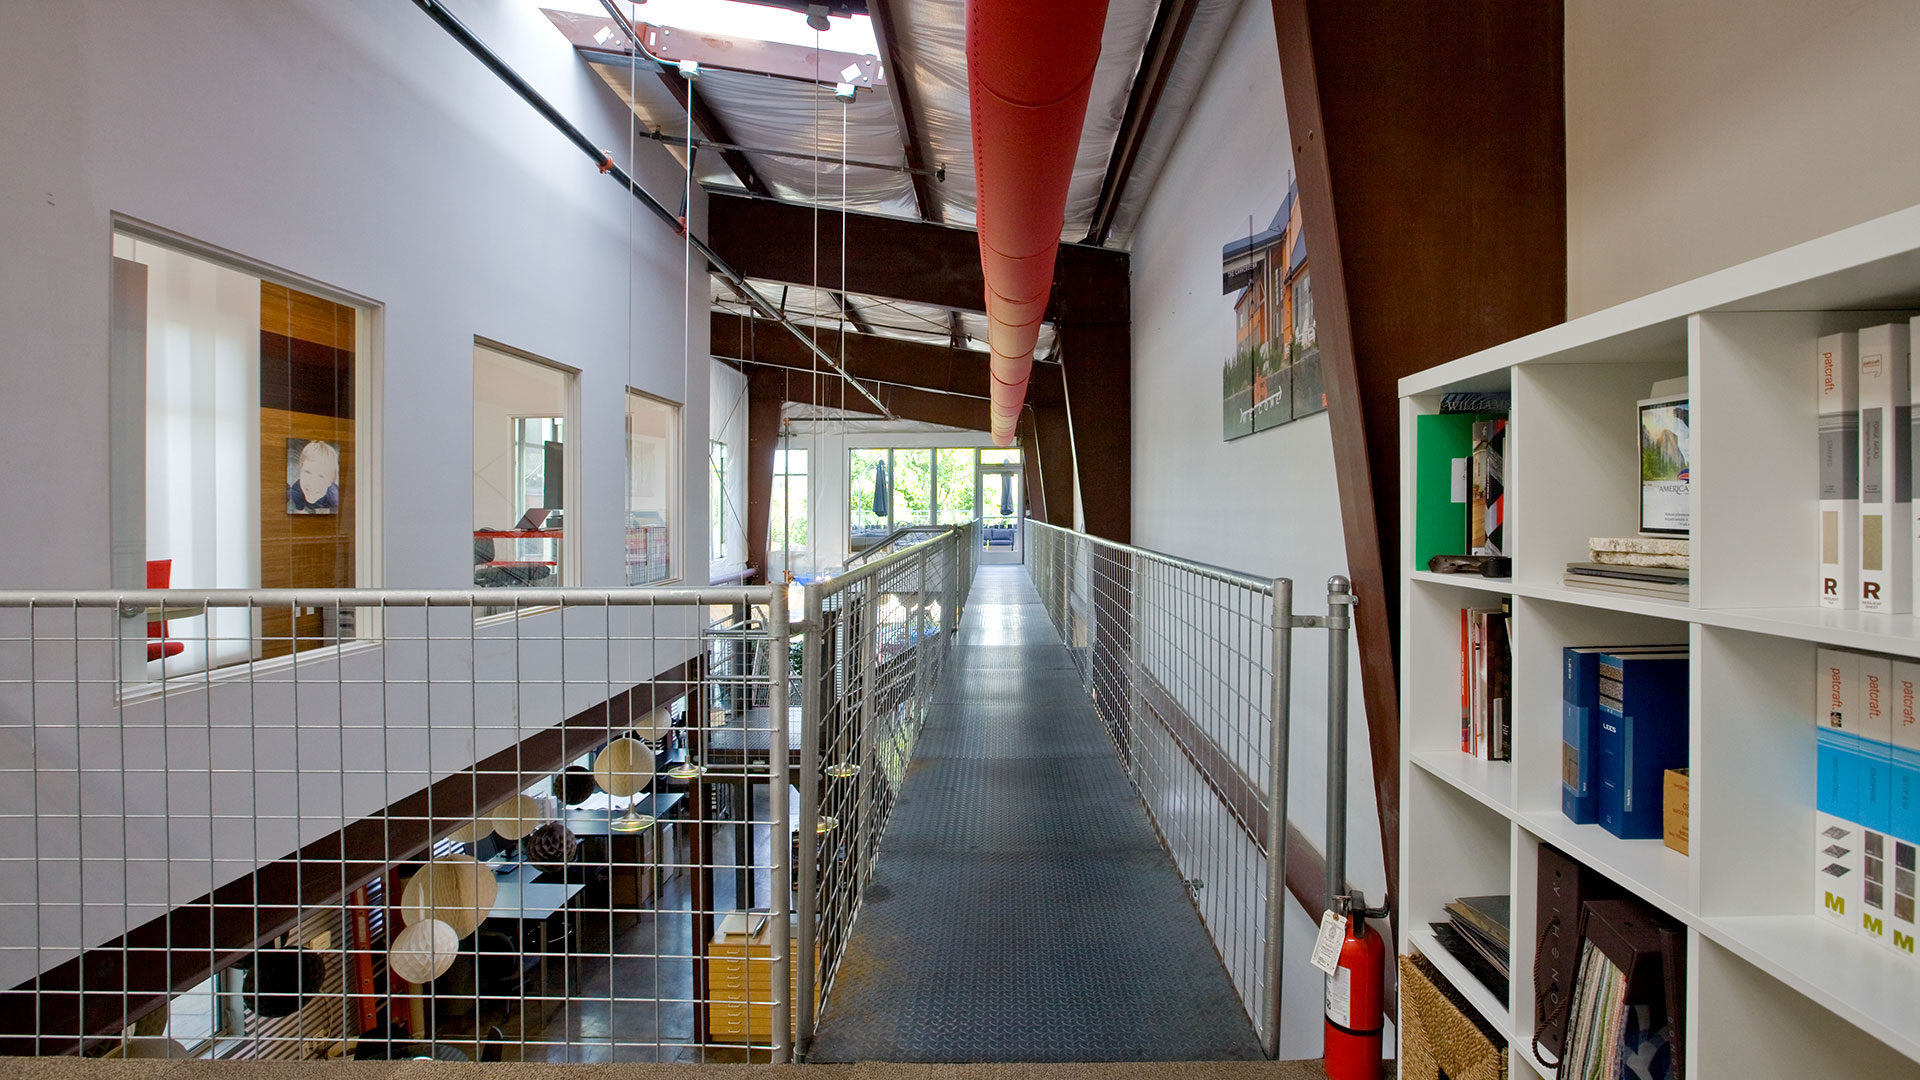 View of office upper floor, with metal catwalk and railings leading to mezzanine